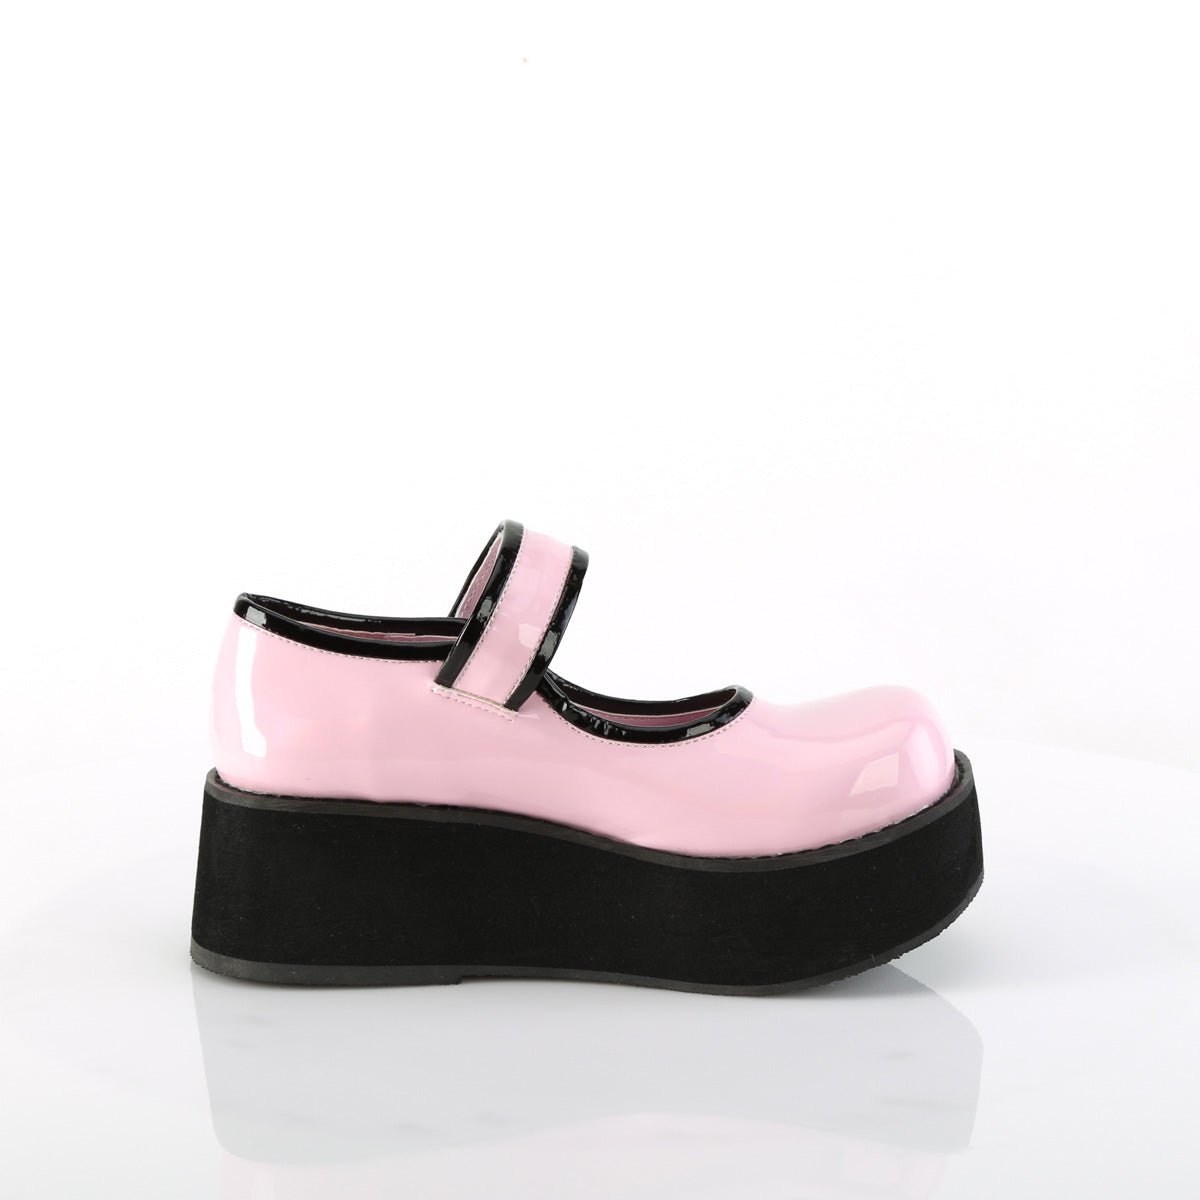 Too Fast | Demonia Sprite 01 | Baby Pink Hologram Patent Women's Mary Janes